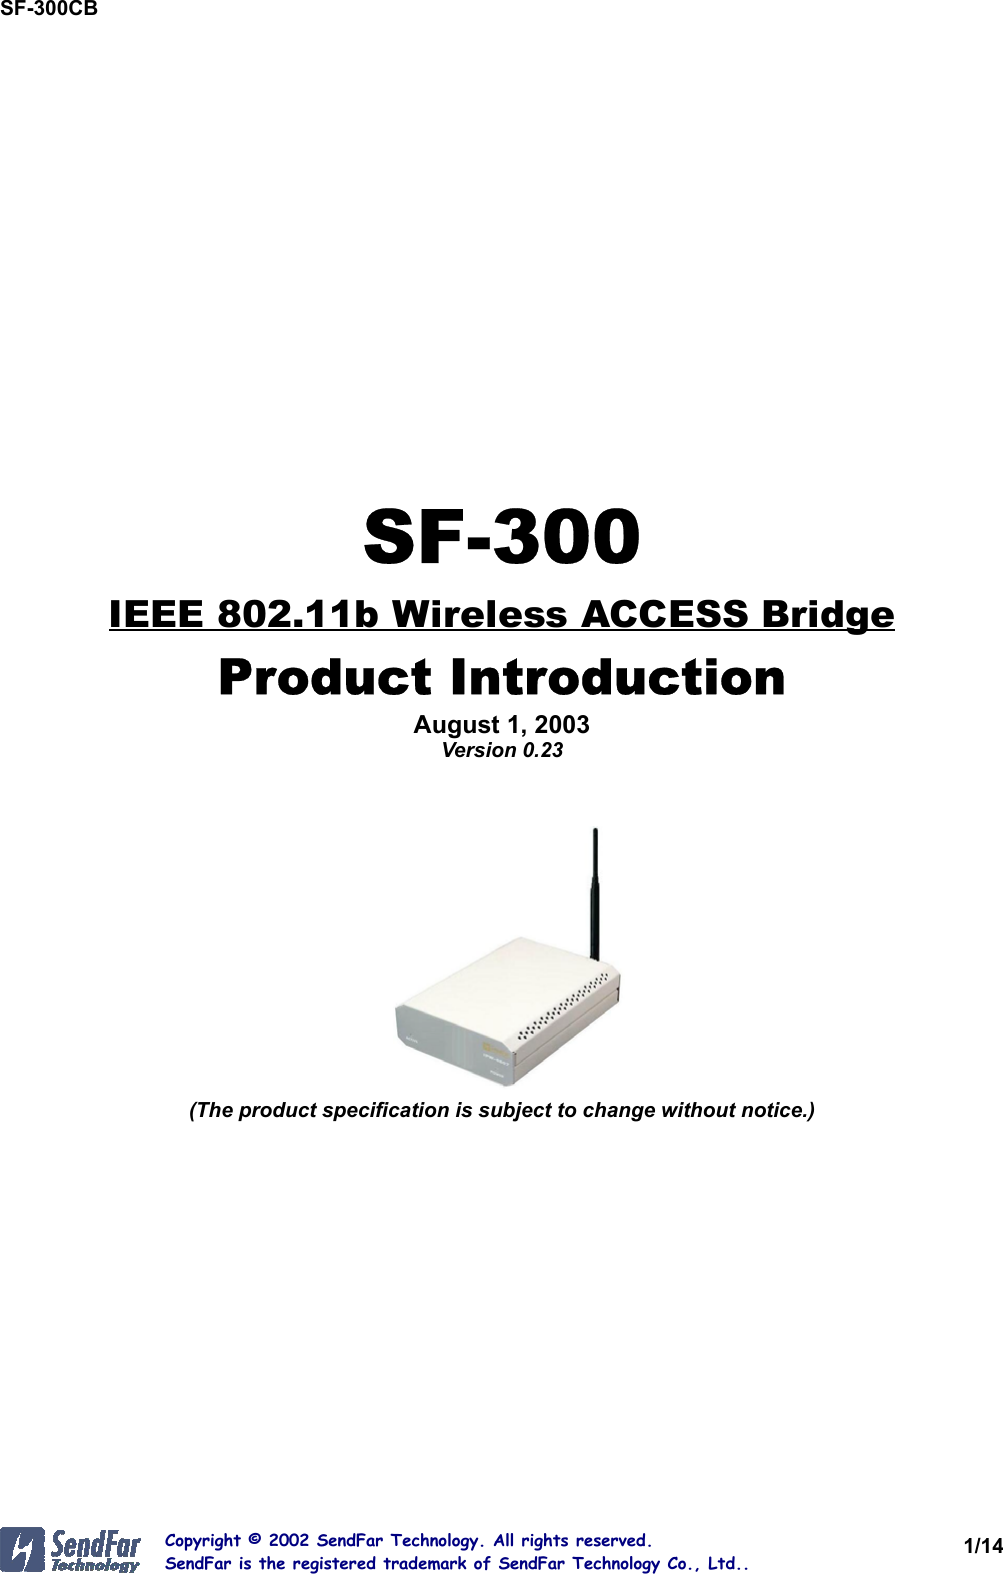 SF-300CB1/14Copyright © 2002 SendFar Technology. All rights reserved.SendFar is the registered trademark of SendFar Technology Co., Ltd..SF-300IEEE 802.11b Wireless ACCESS BridgeProduct IntroductionAugust 1, 2003Version 0.23(The product specification is subject to change without notice.)